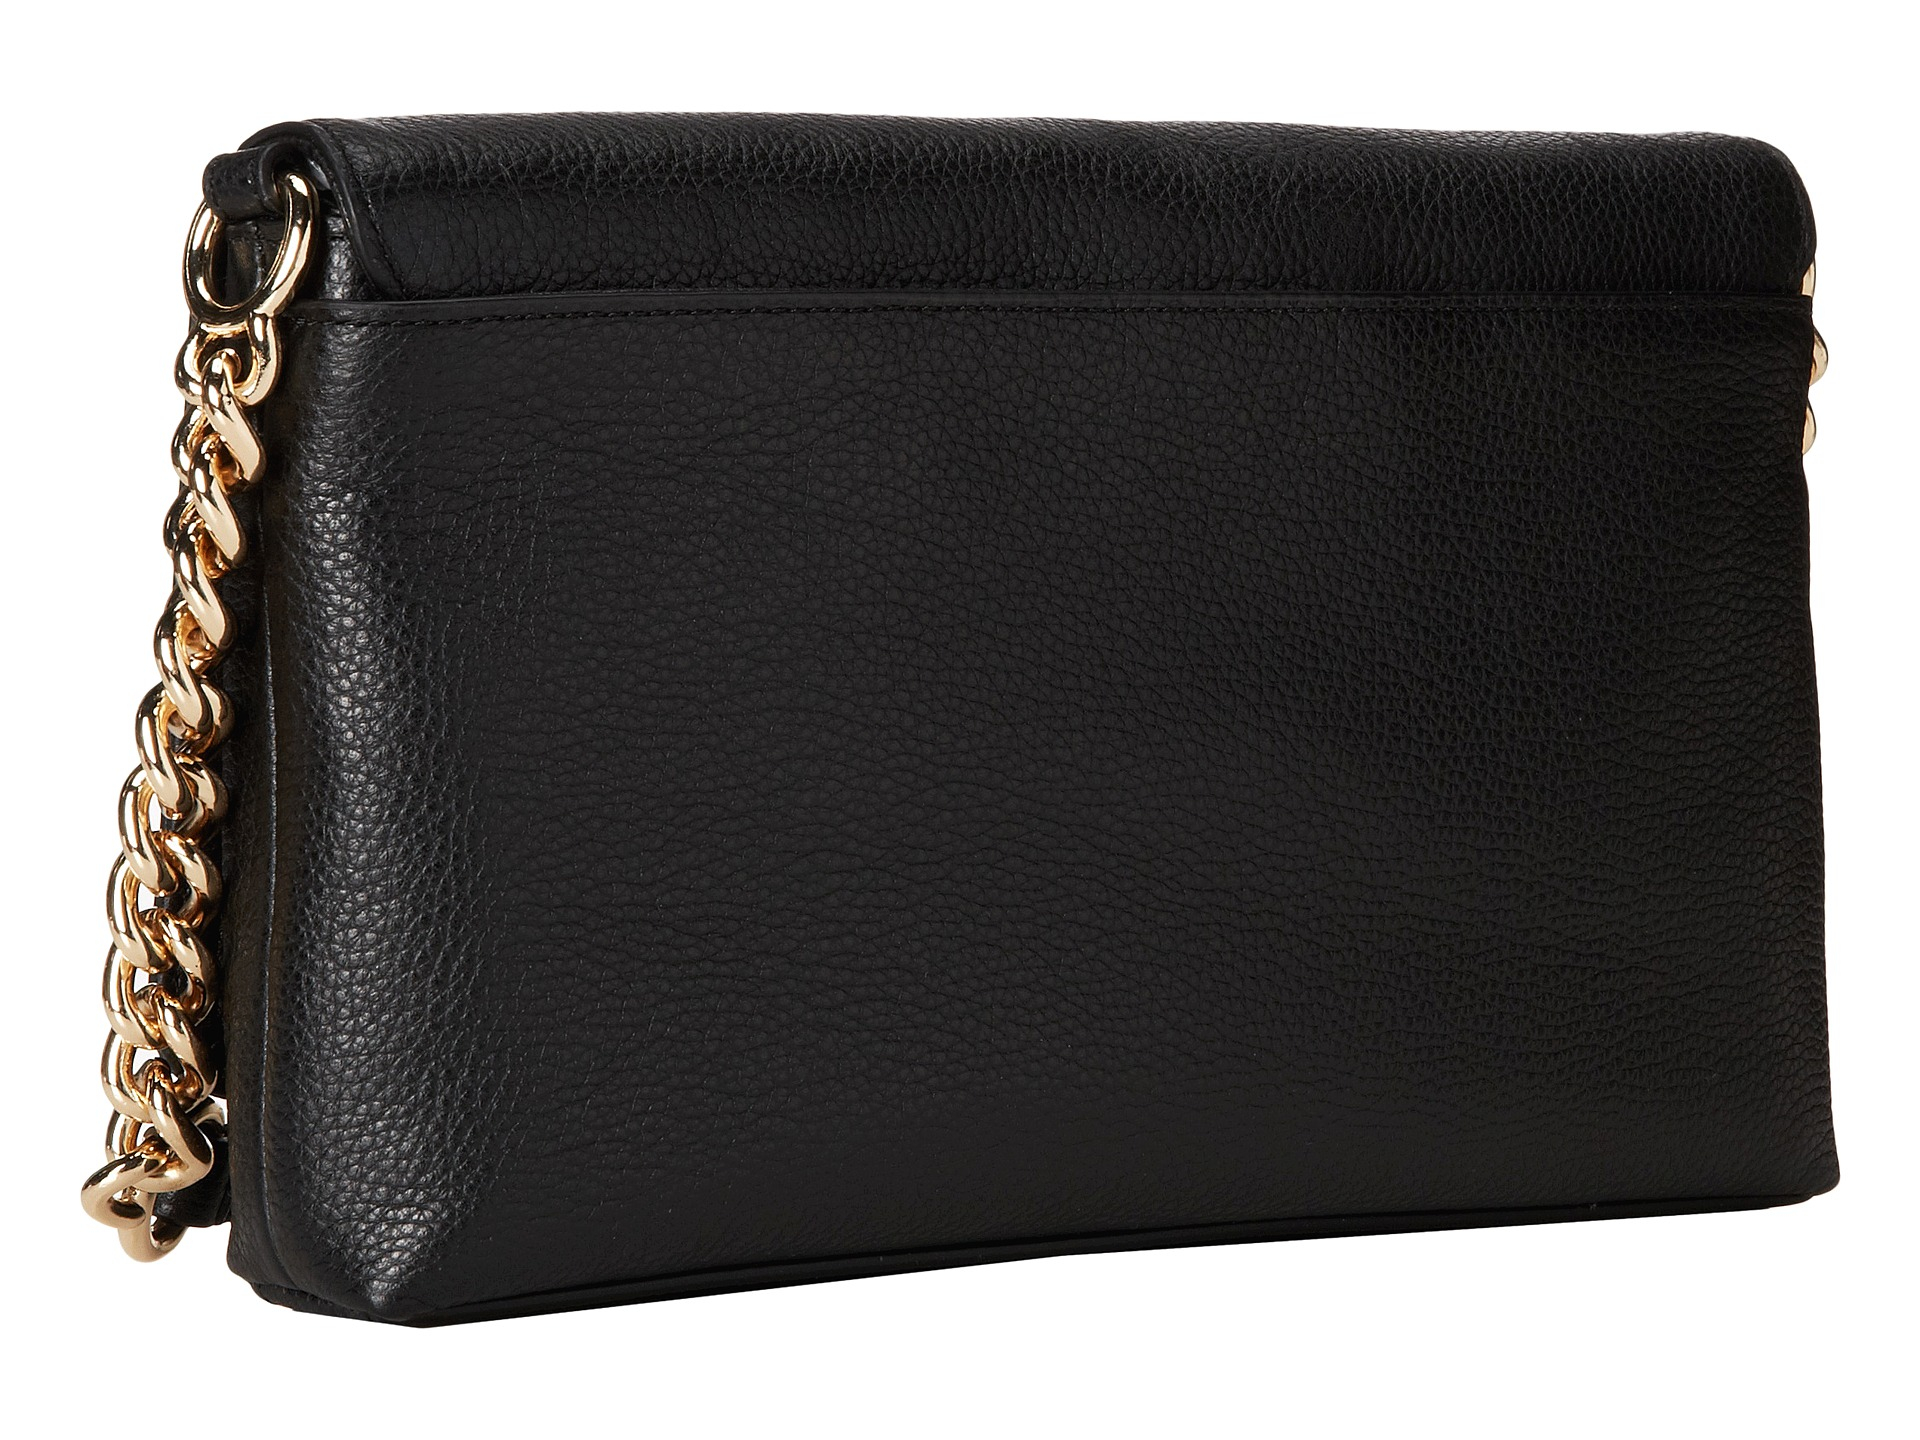 Lyst - Coach Polished Pebble Leather Crosstown Crossbody in Black